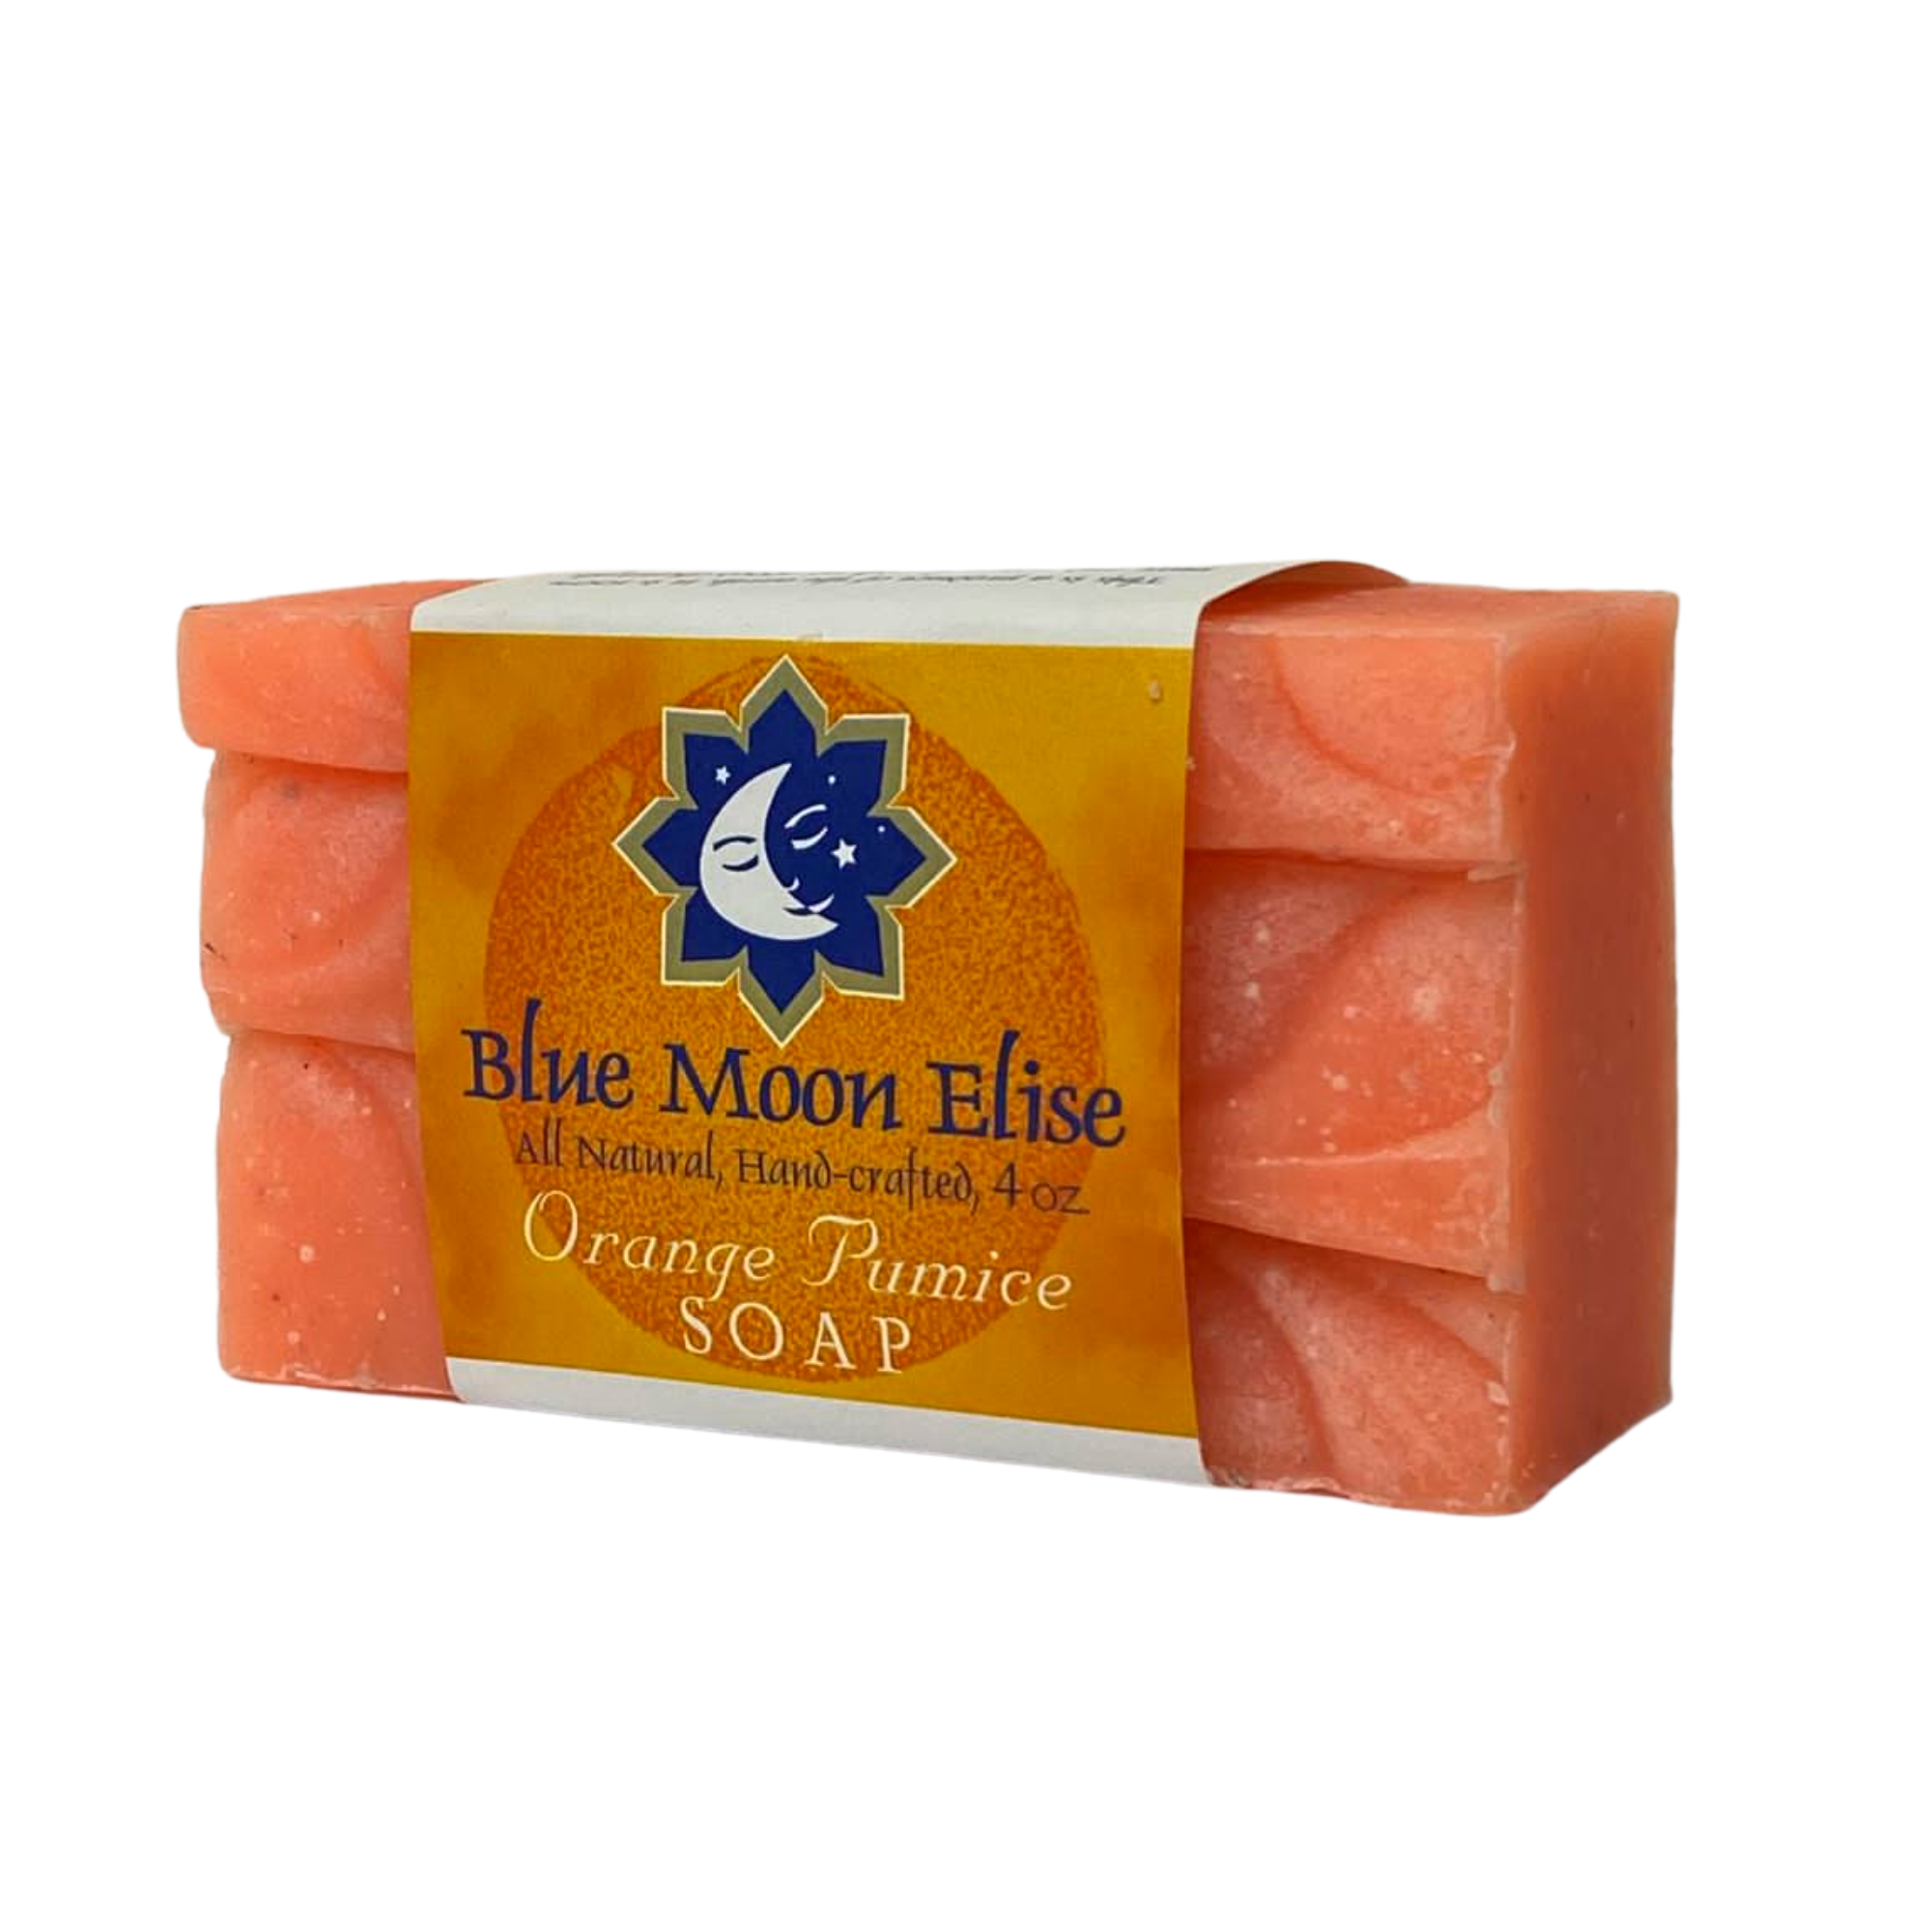 Orange Pumice Soap (Buy 1, Add 2 More for FREE)